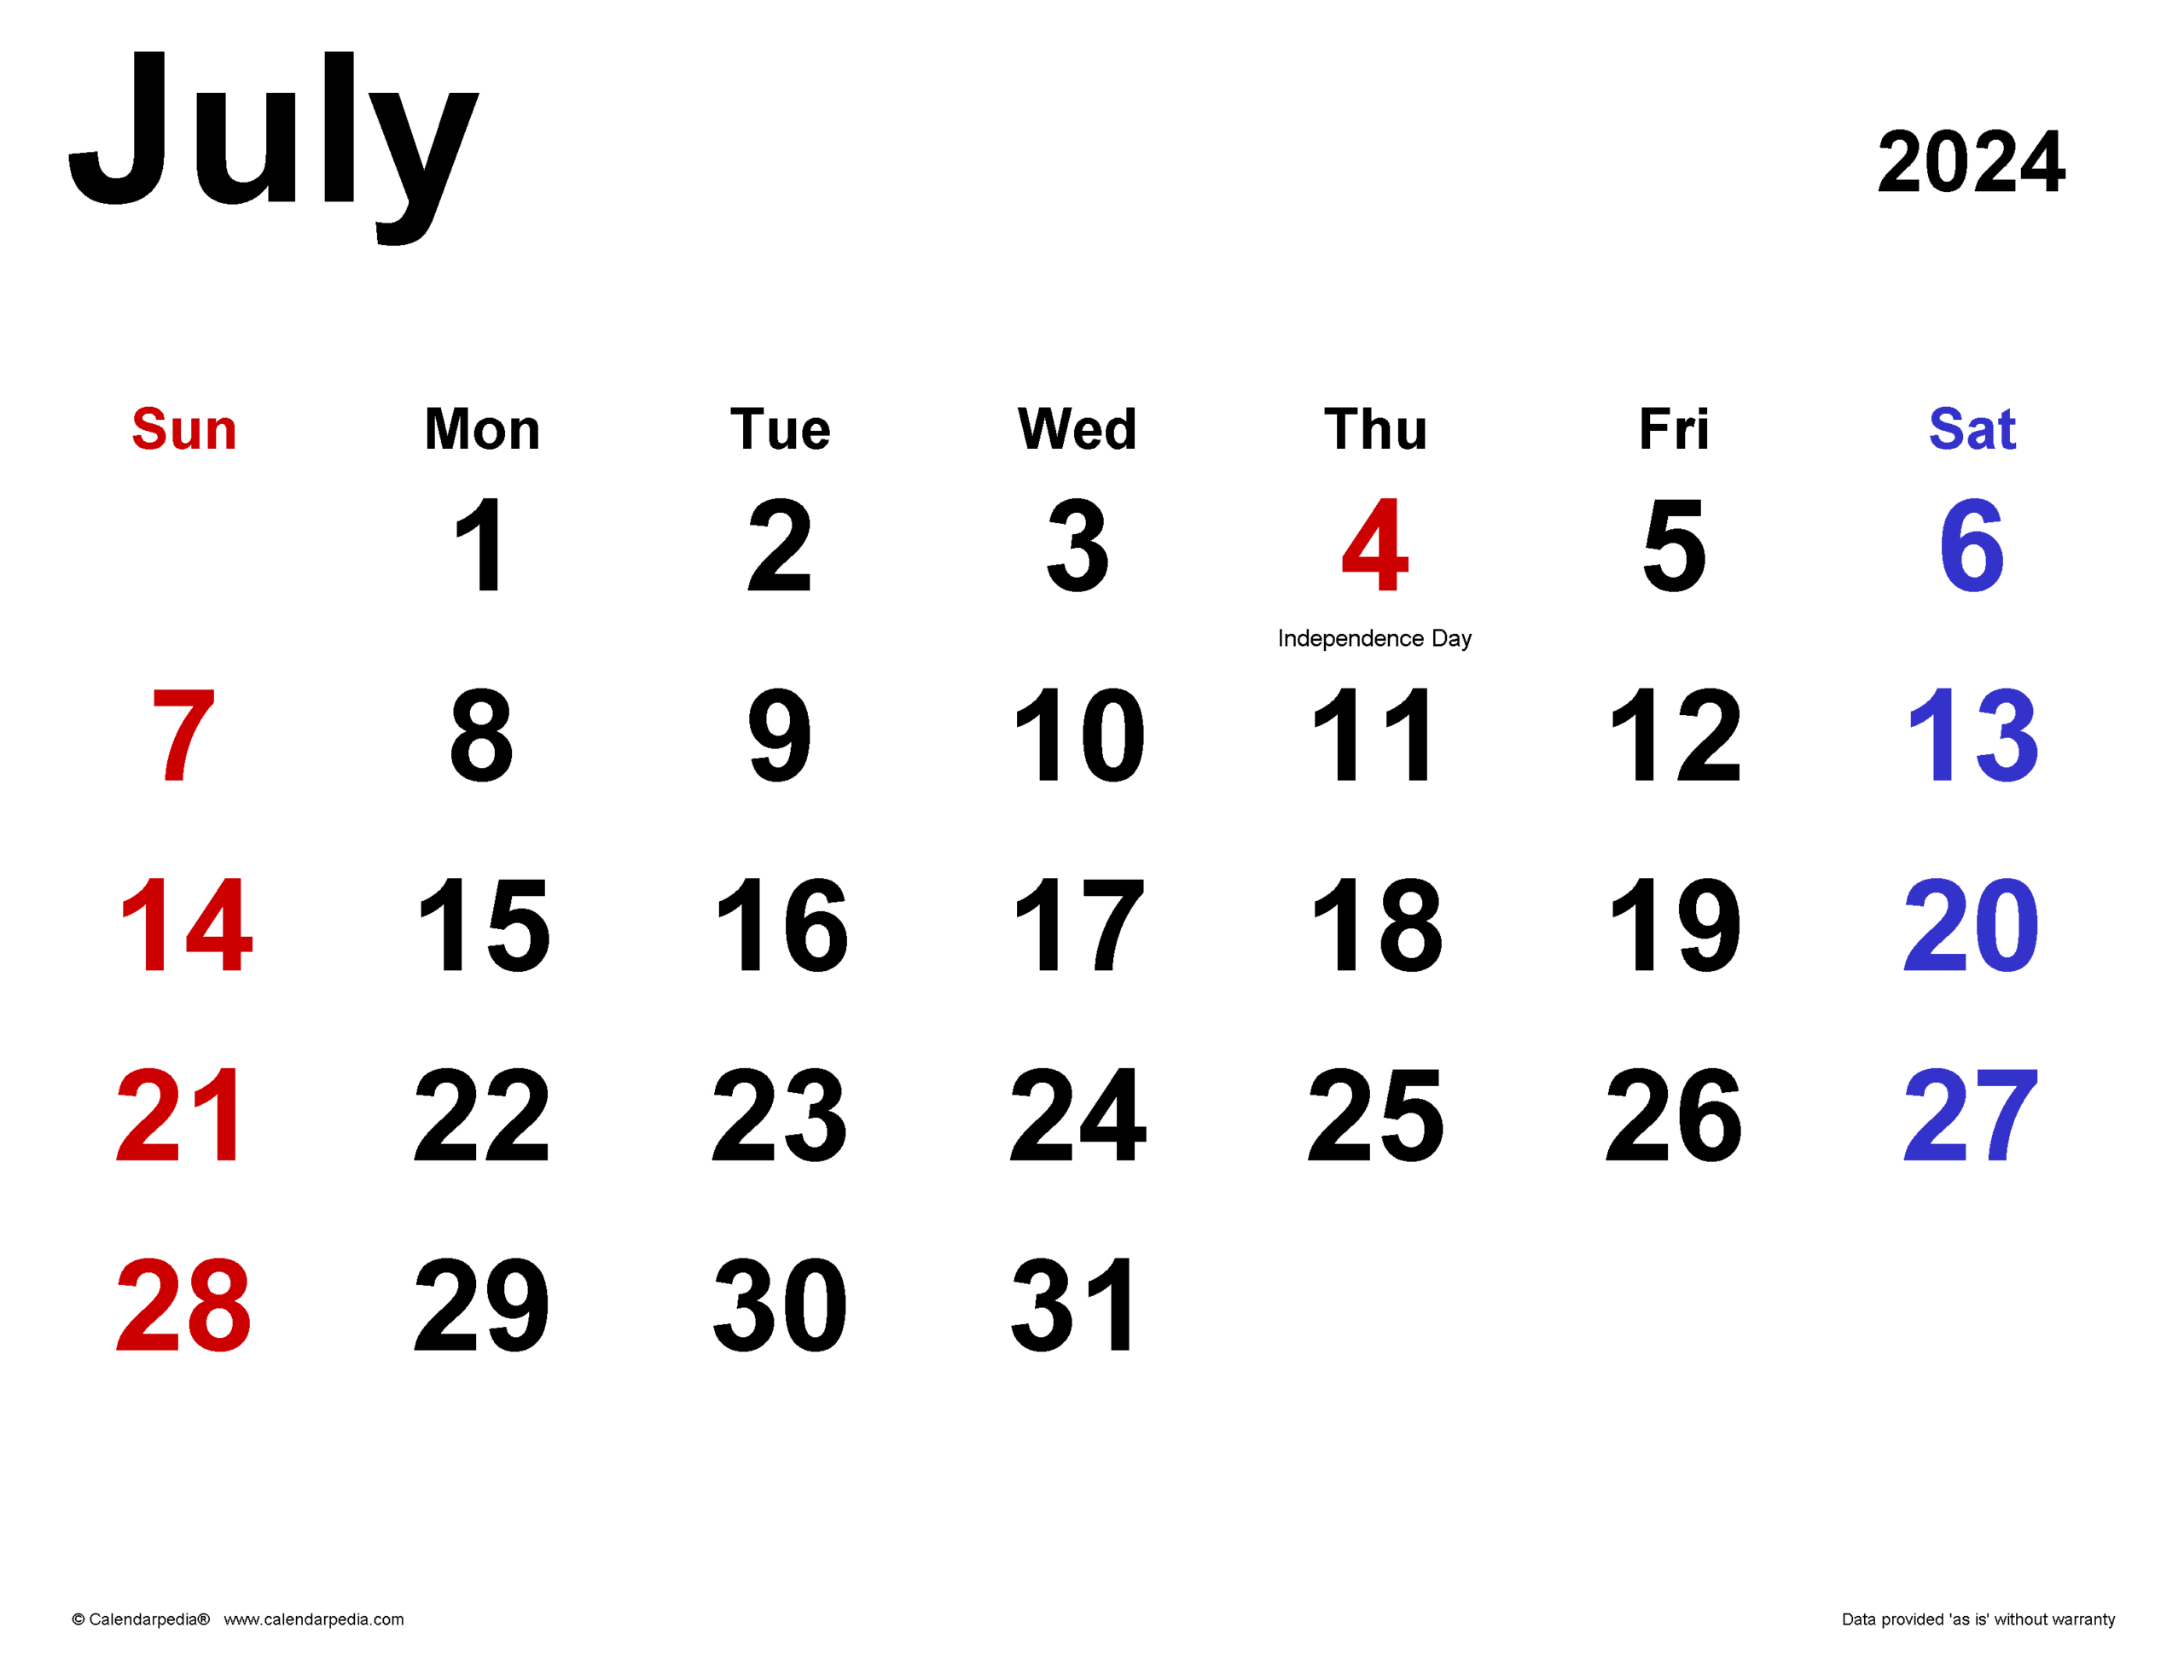 July 2024 Calendar | Templates For Word, Excel And Pdf intended for July Calendar Word 2024